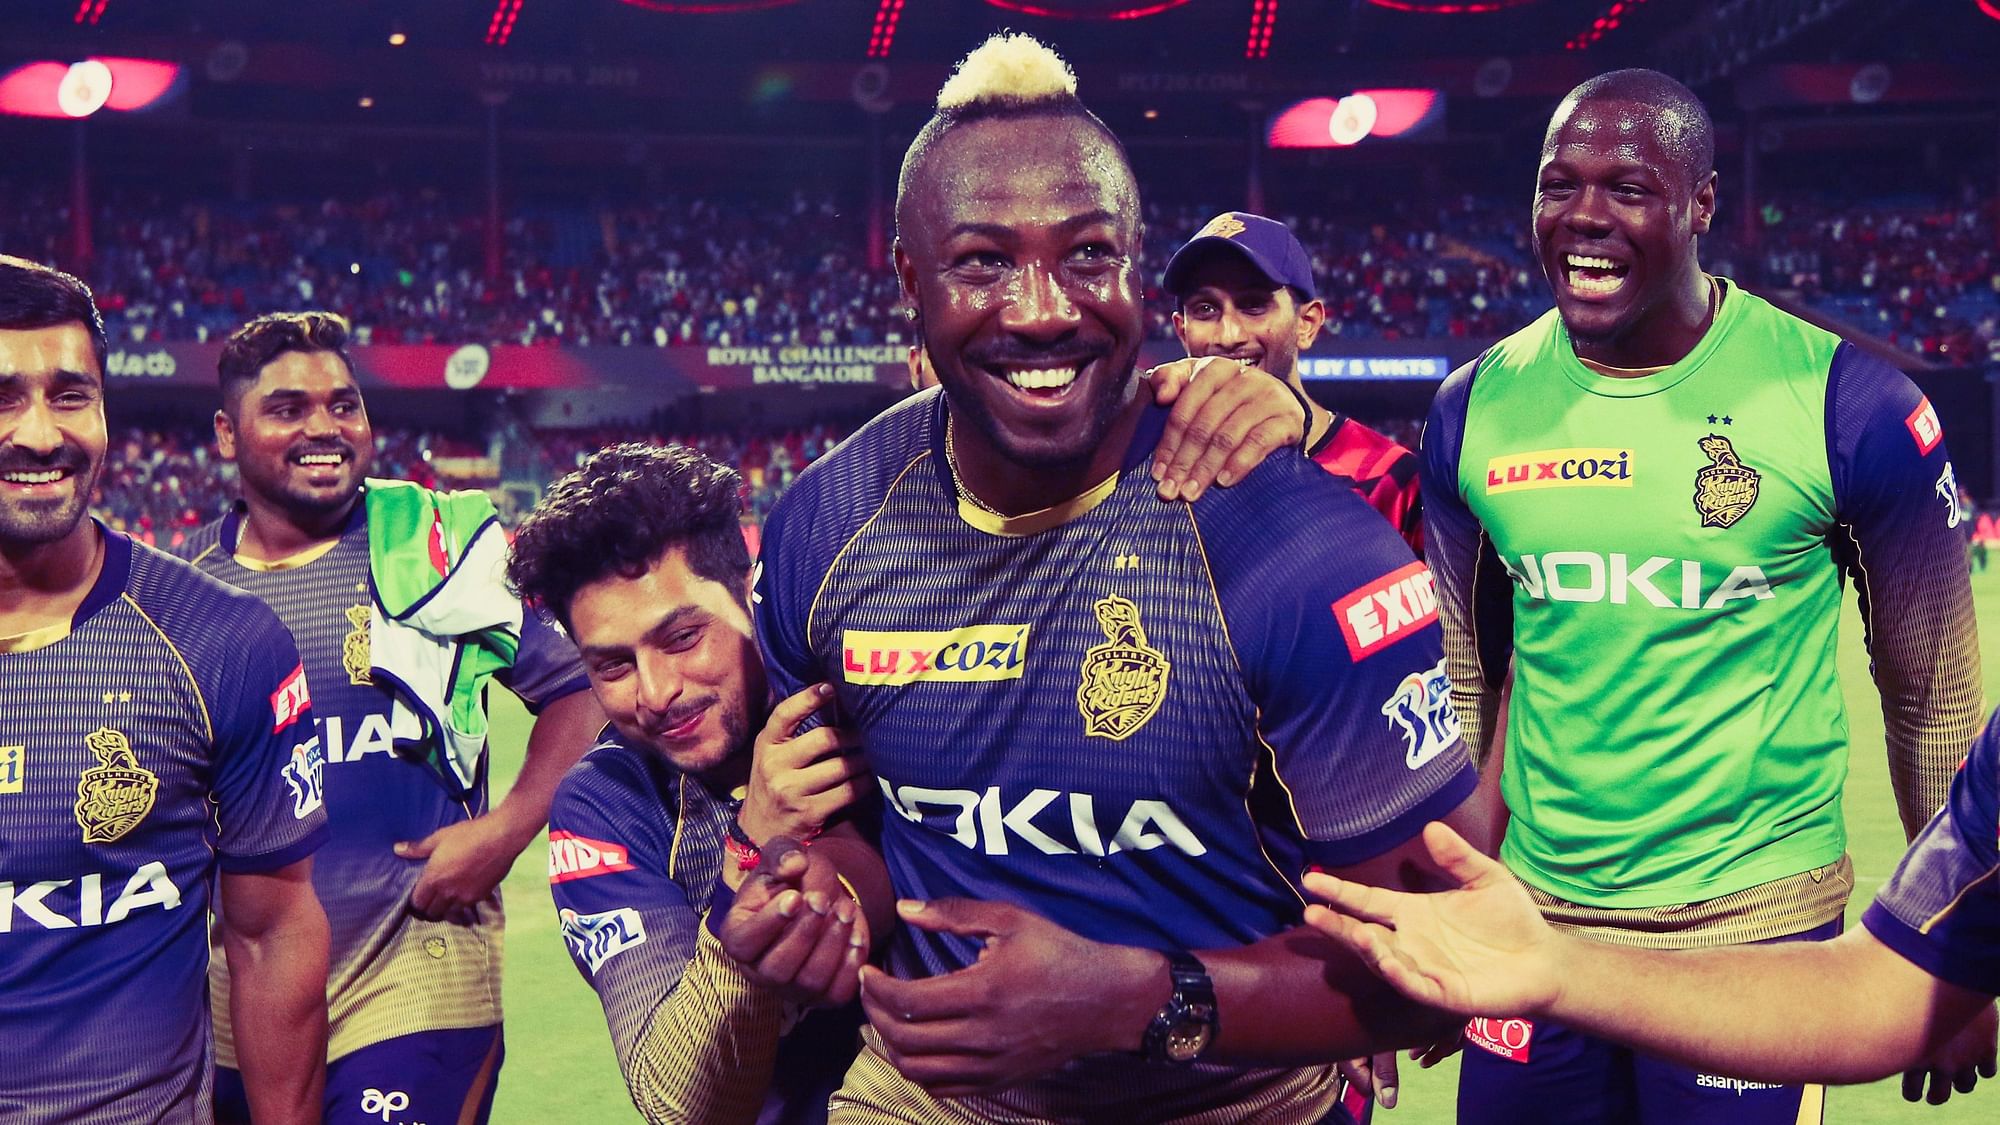 Kolkata Knight Riders lead the table with eight points from five matches.